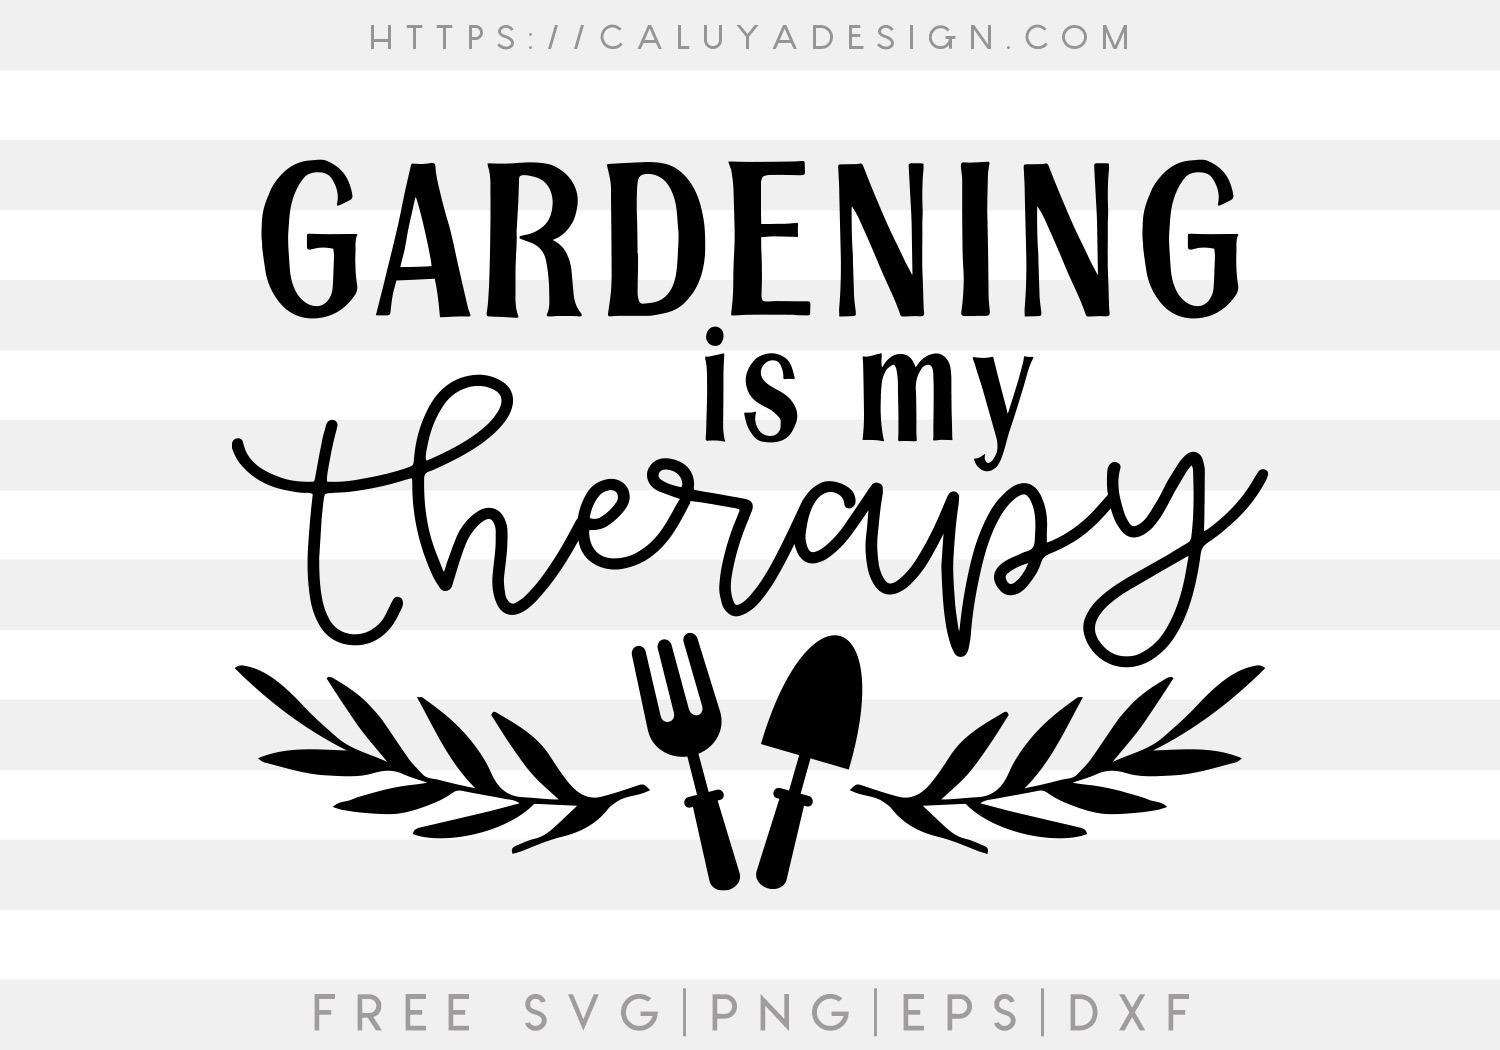 Gardening Is My Therapy SVG, PNG, EPS & DXF